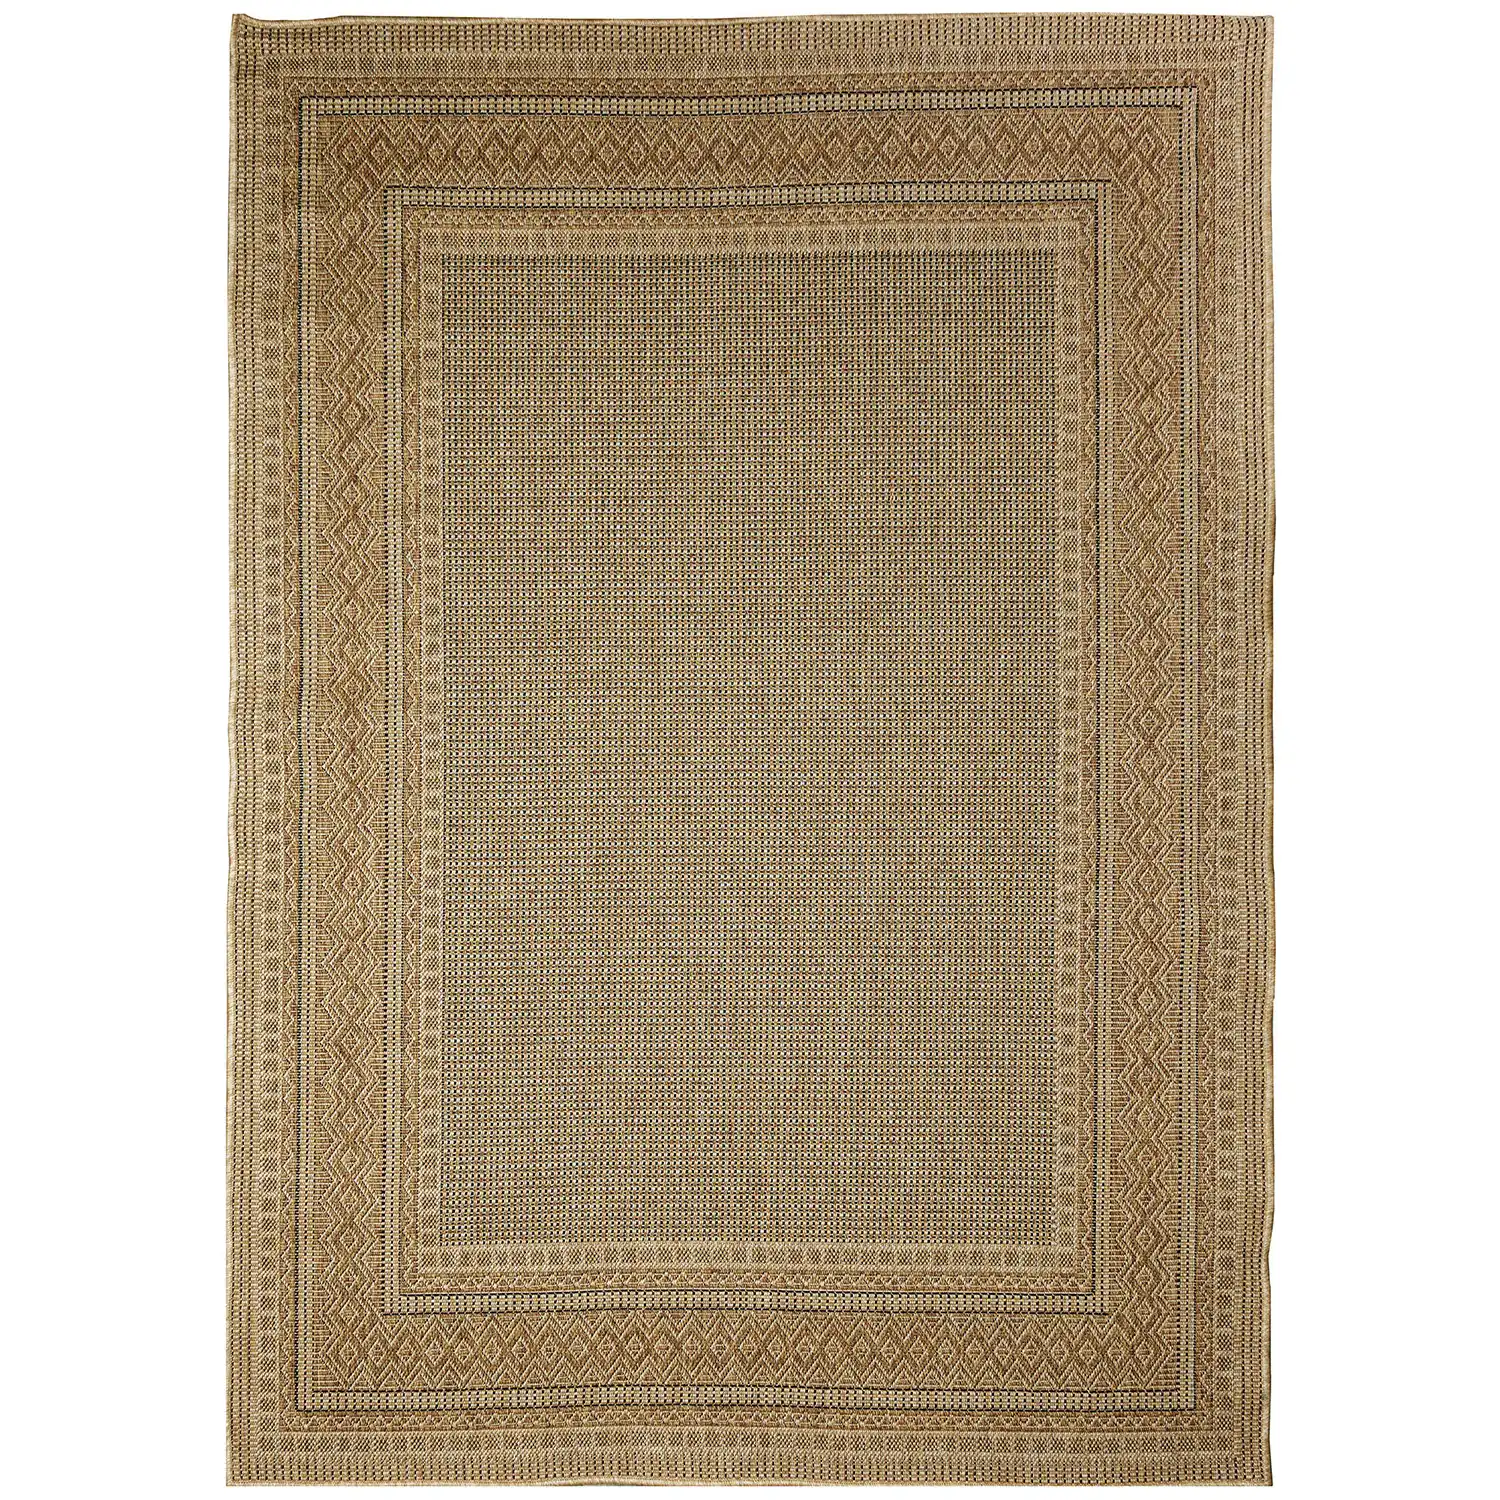 Liora Manne Monterey Low Profile  Easy Care Weather Resistant Indoor/Outdoor Rug-Transitional, Geome Product Image